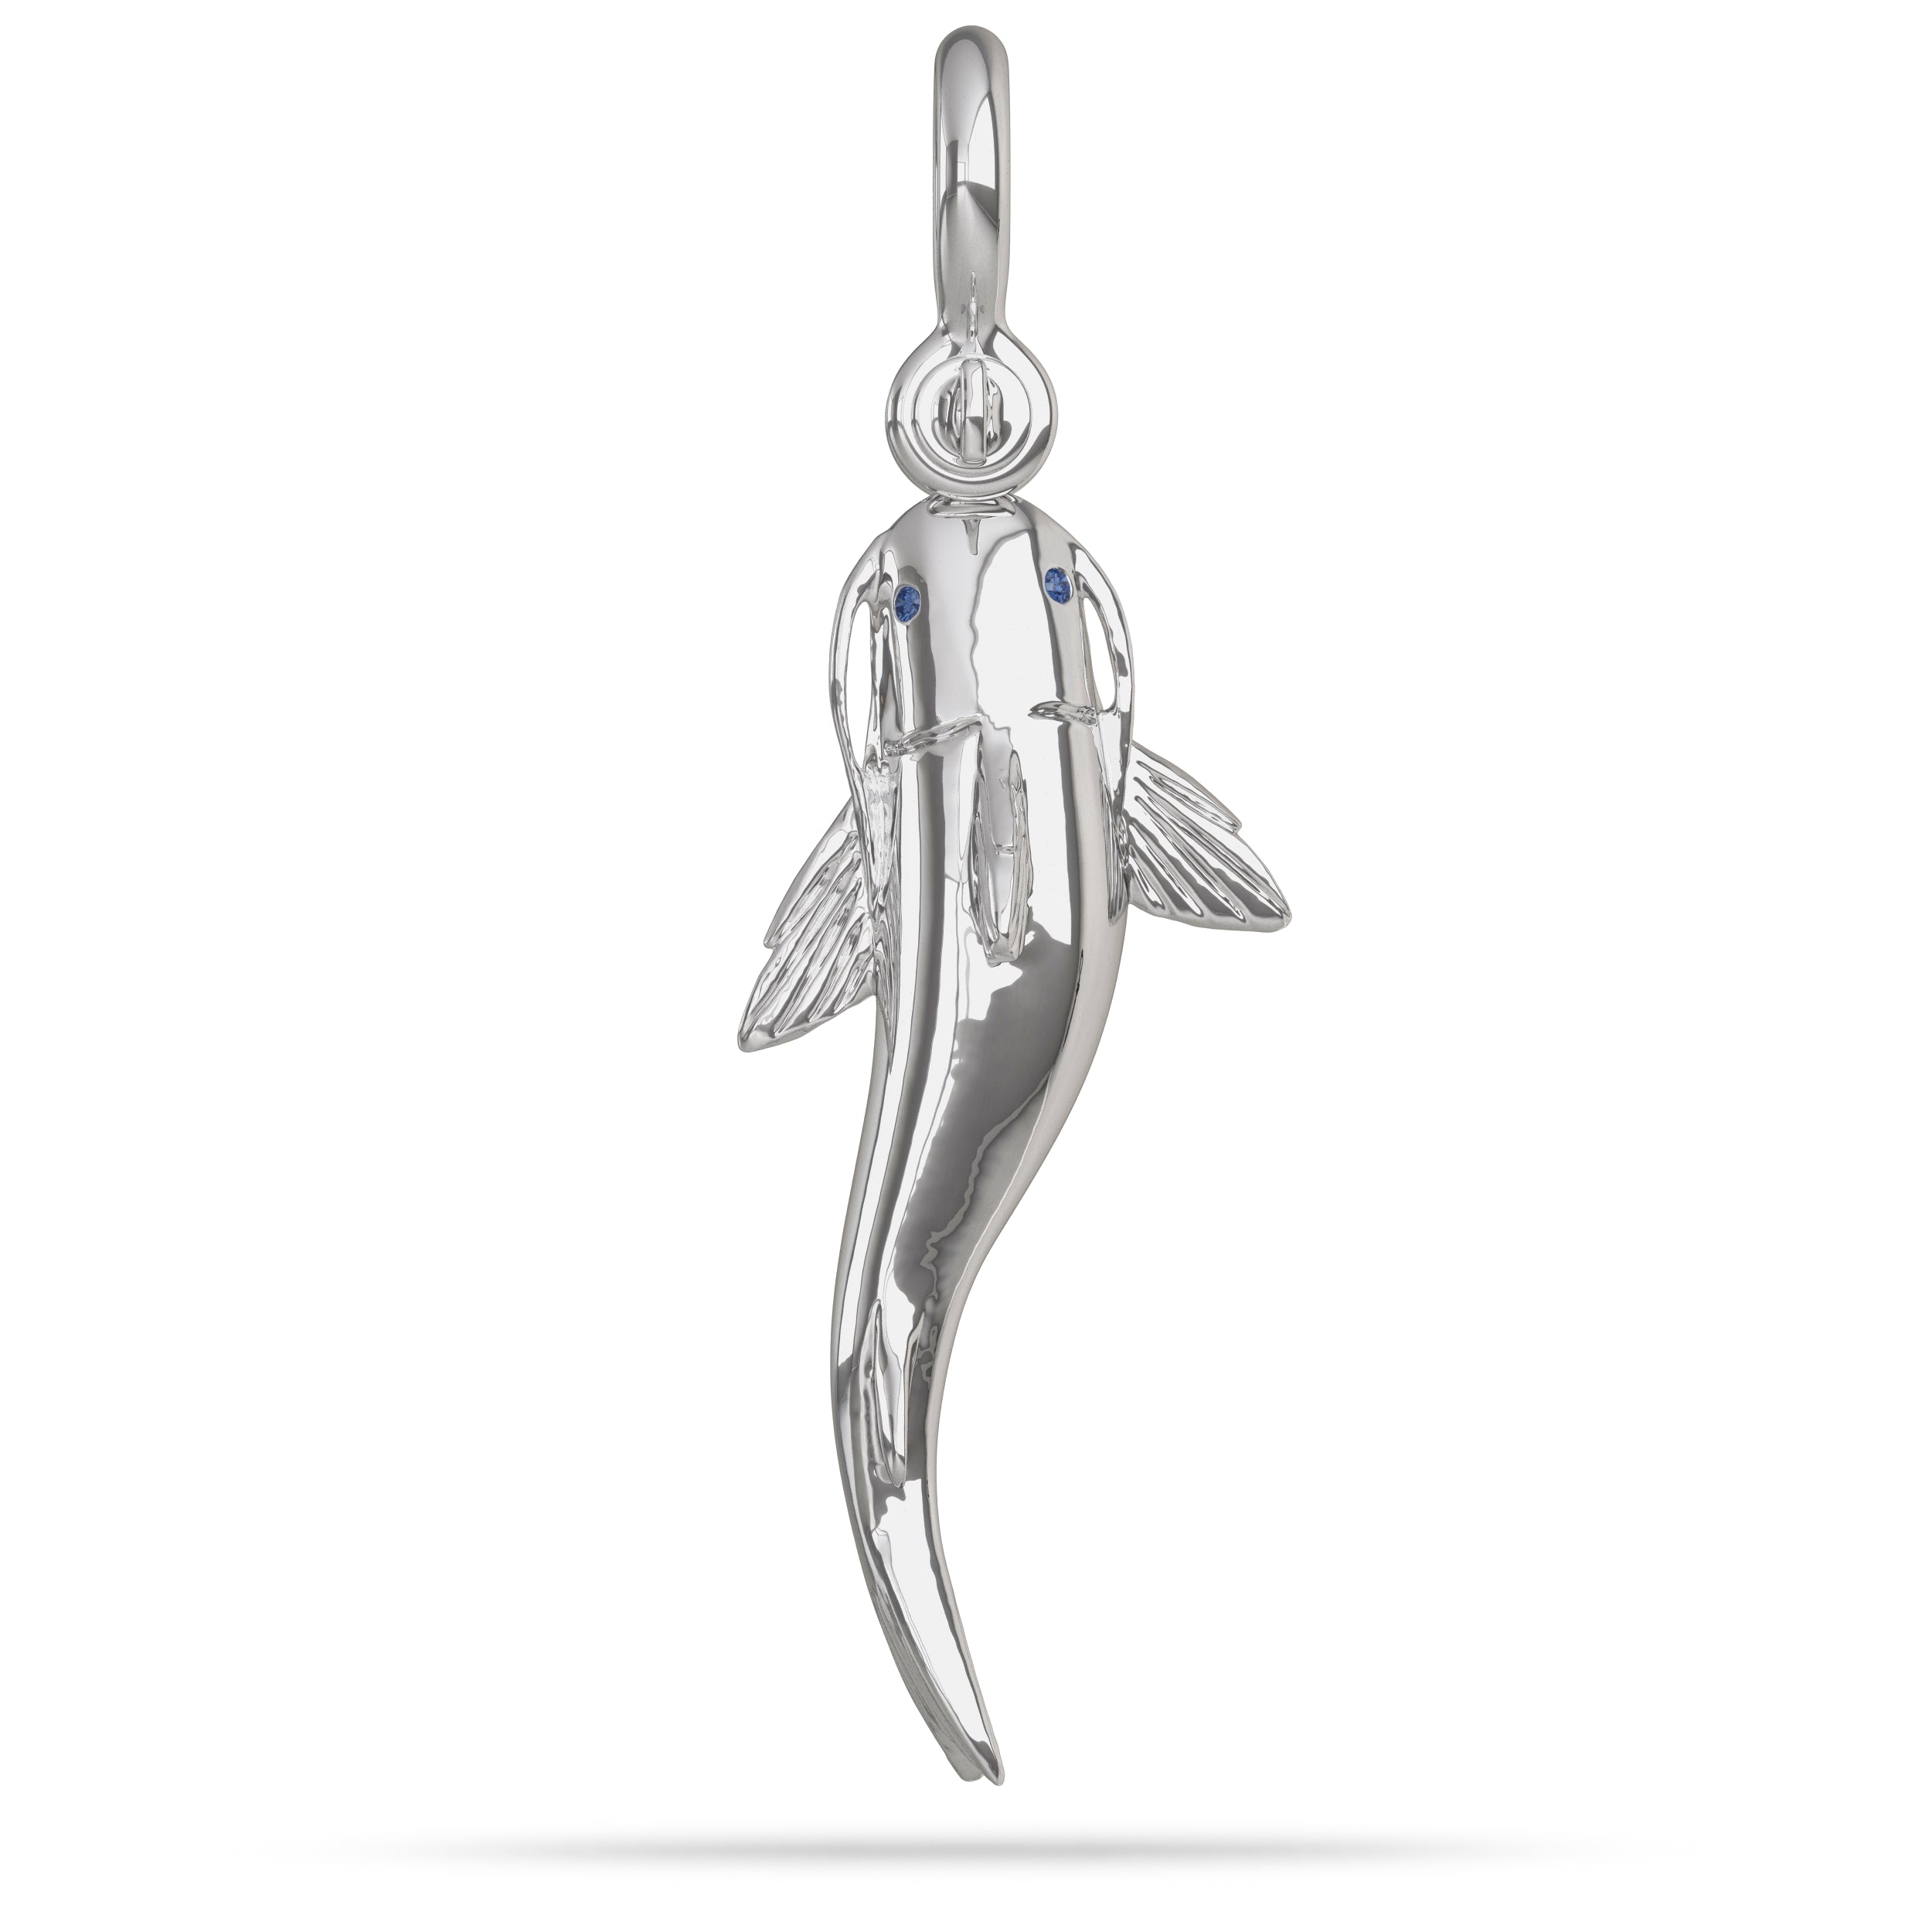 Catfish Pendant Channel Cat I Nautical Treasure Jewelry 58mm (Large) / Sterling Silver by Nautical Treasure Jewelry